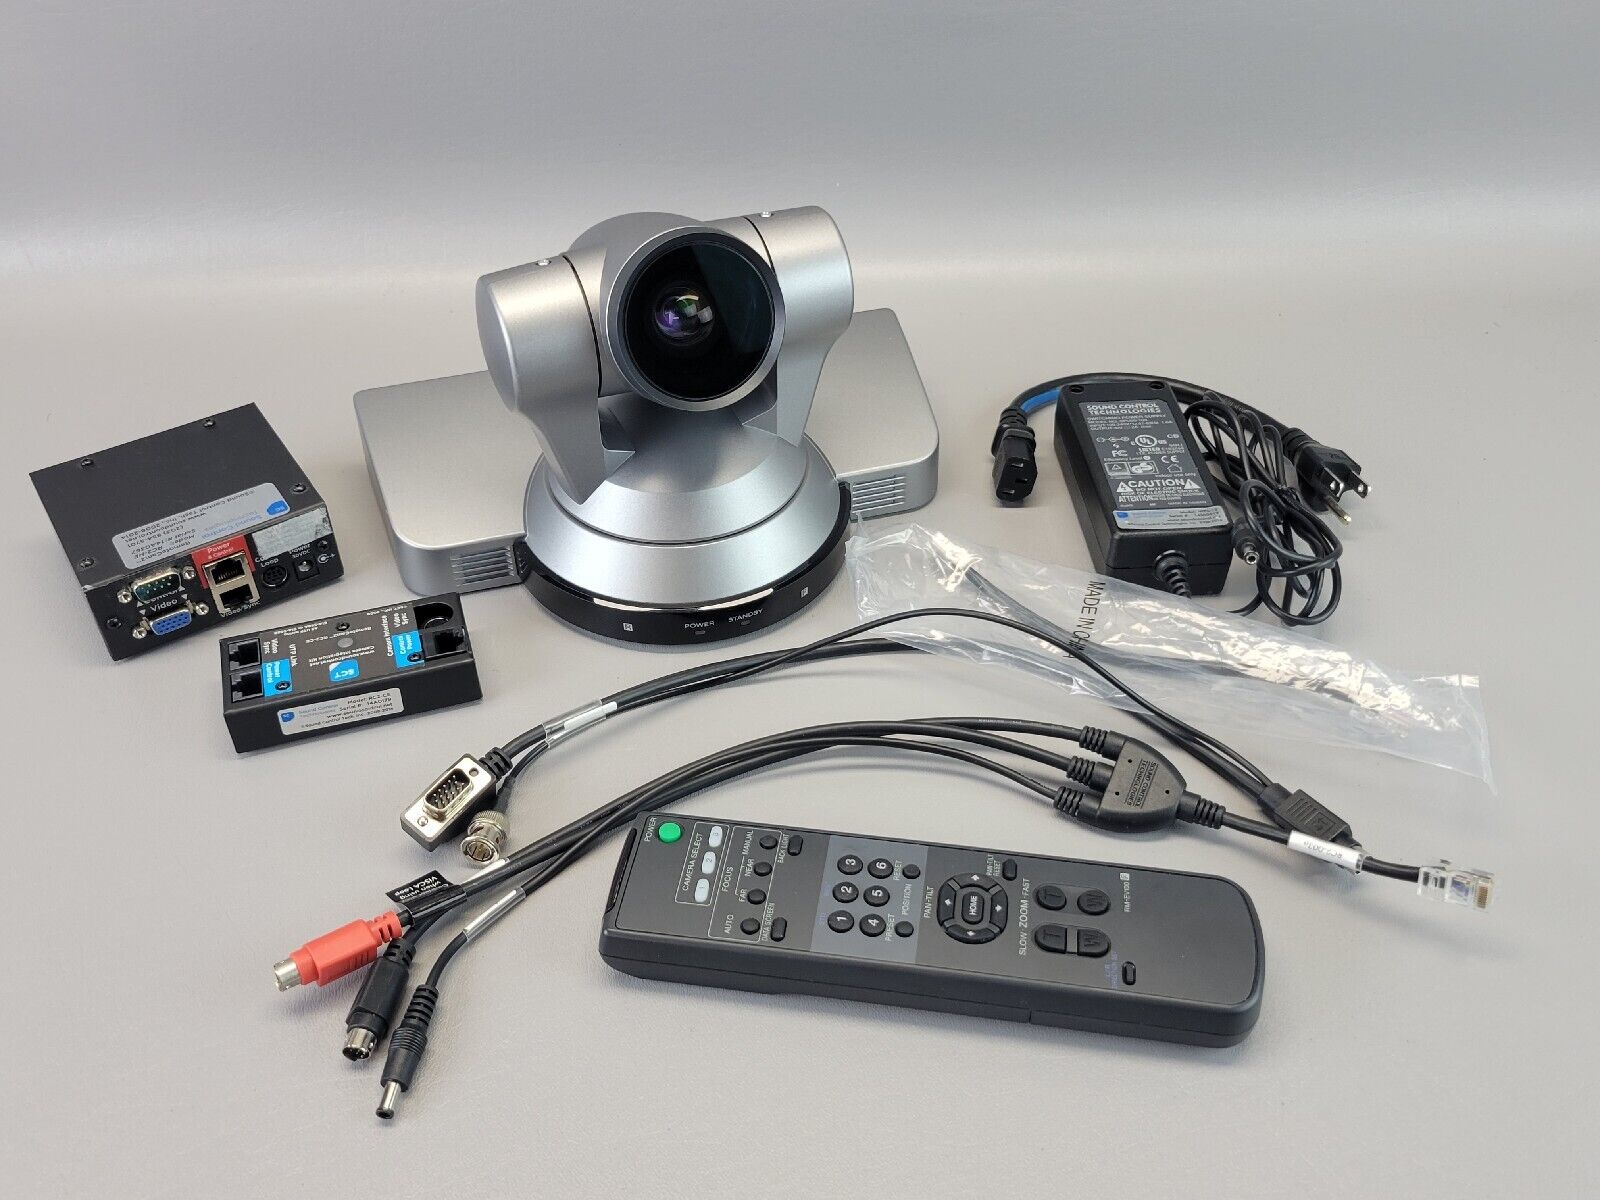 Sony EVI-HD1 Color HD Video Conference Webcam Remote & Accessories Pictured (C)